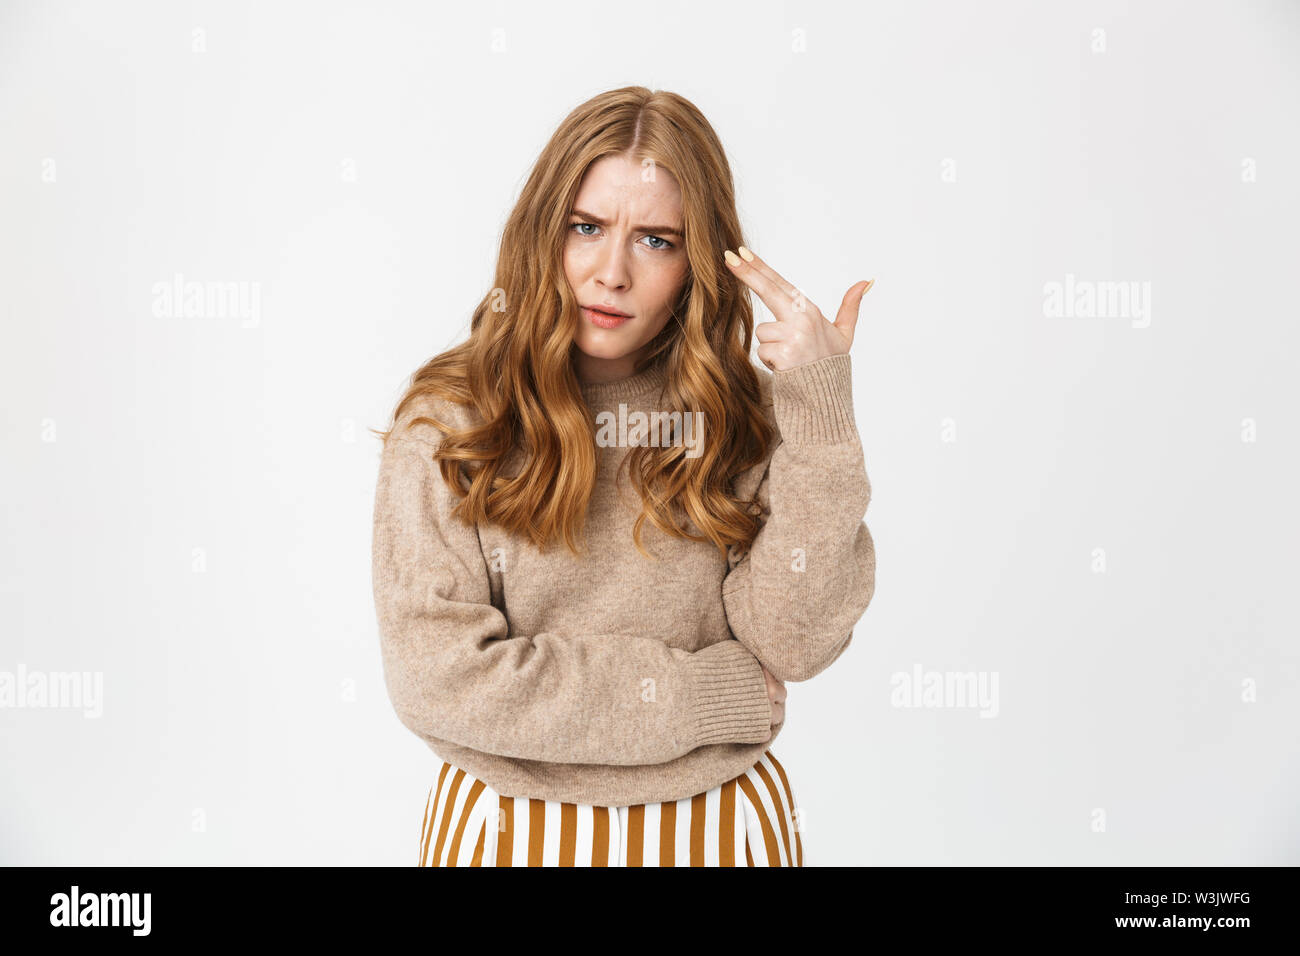 Attractive young girl wearing sweater standing isolated over white background, holding pretend gun at her head Stock Photo